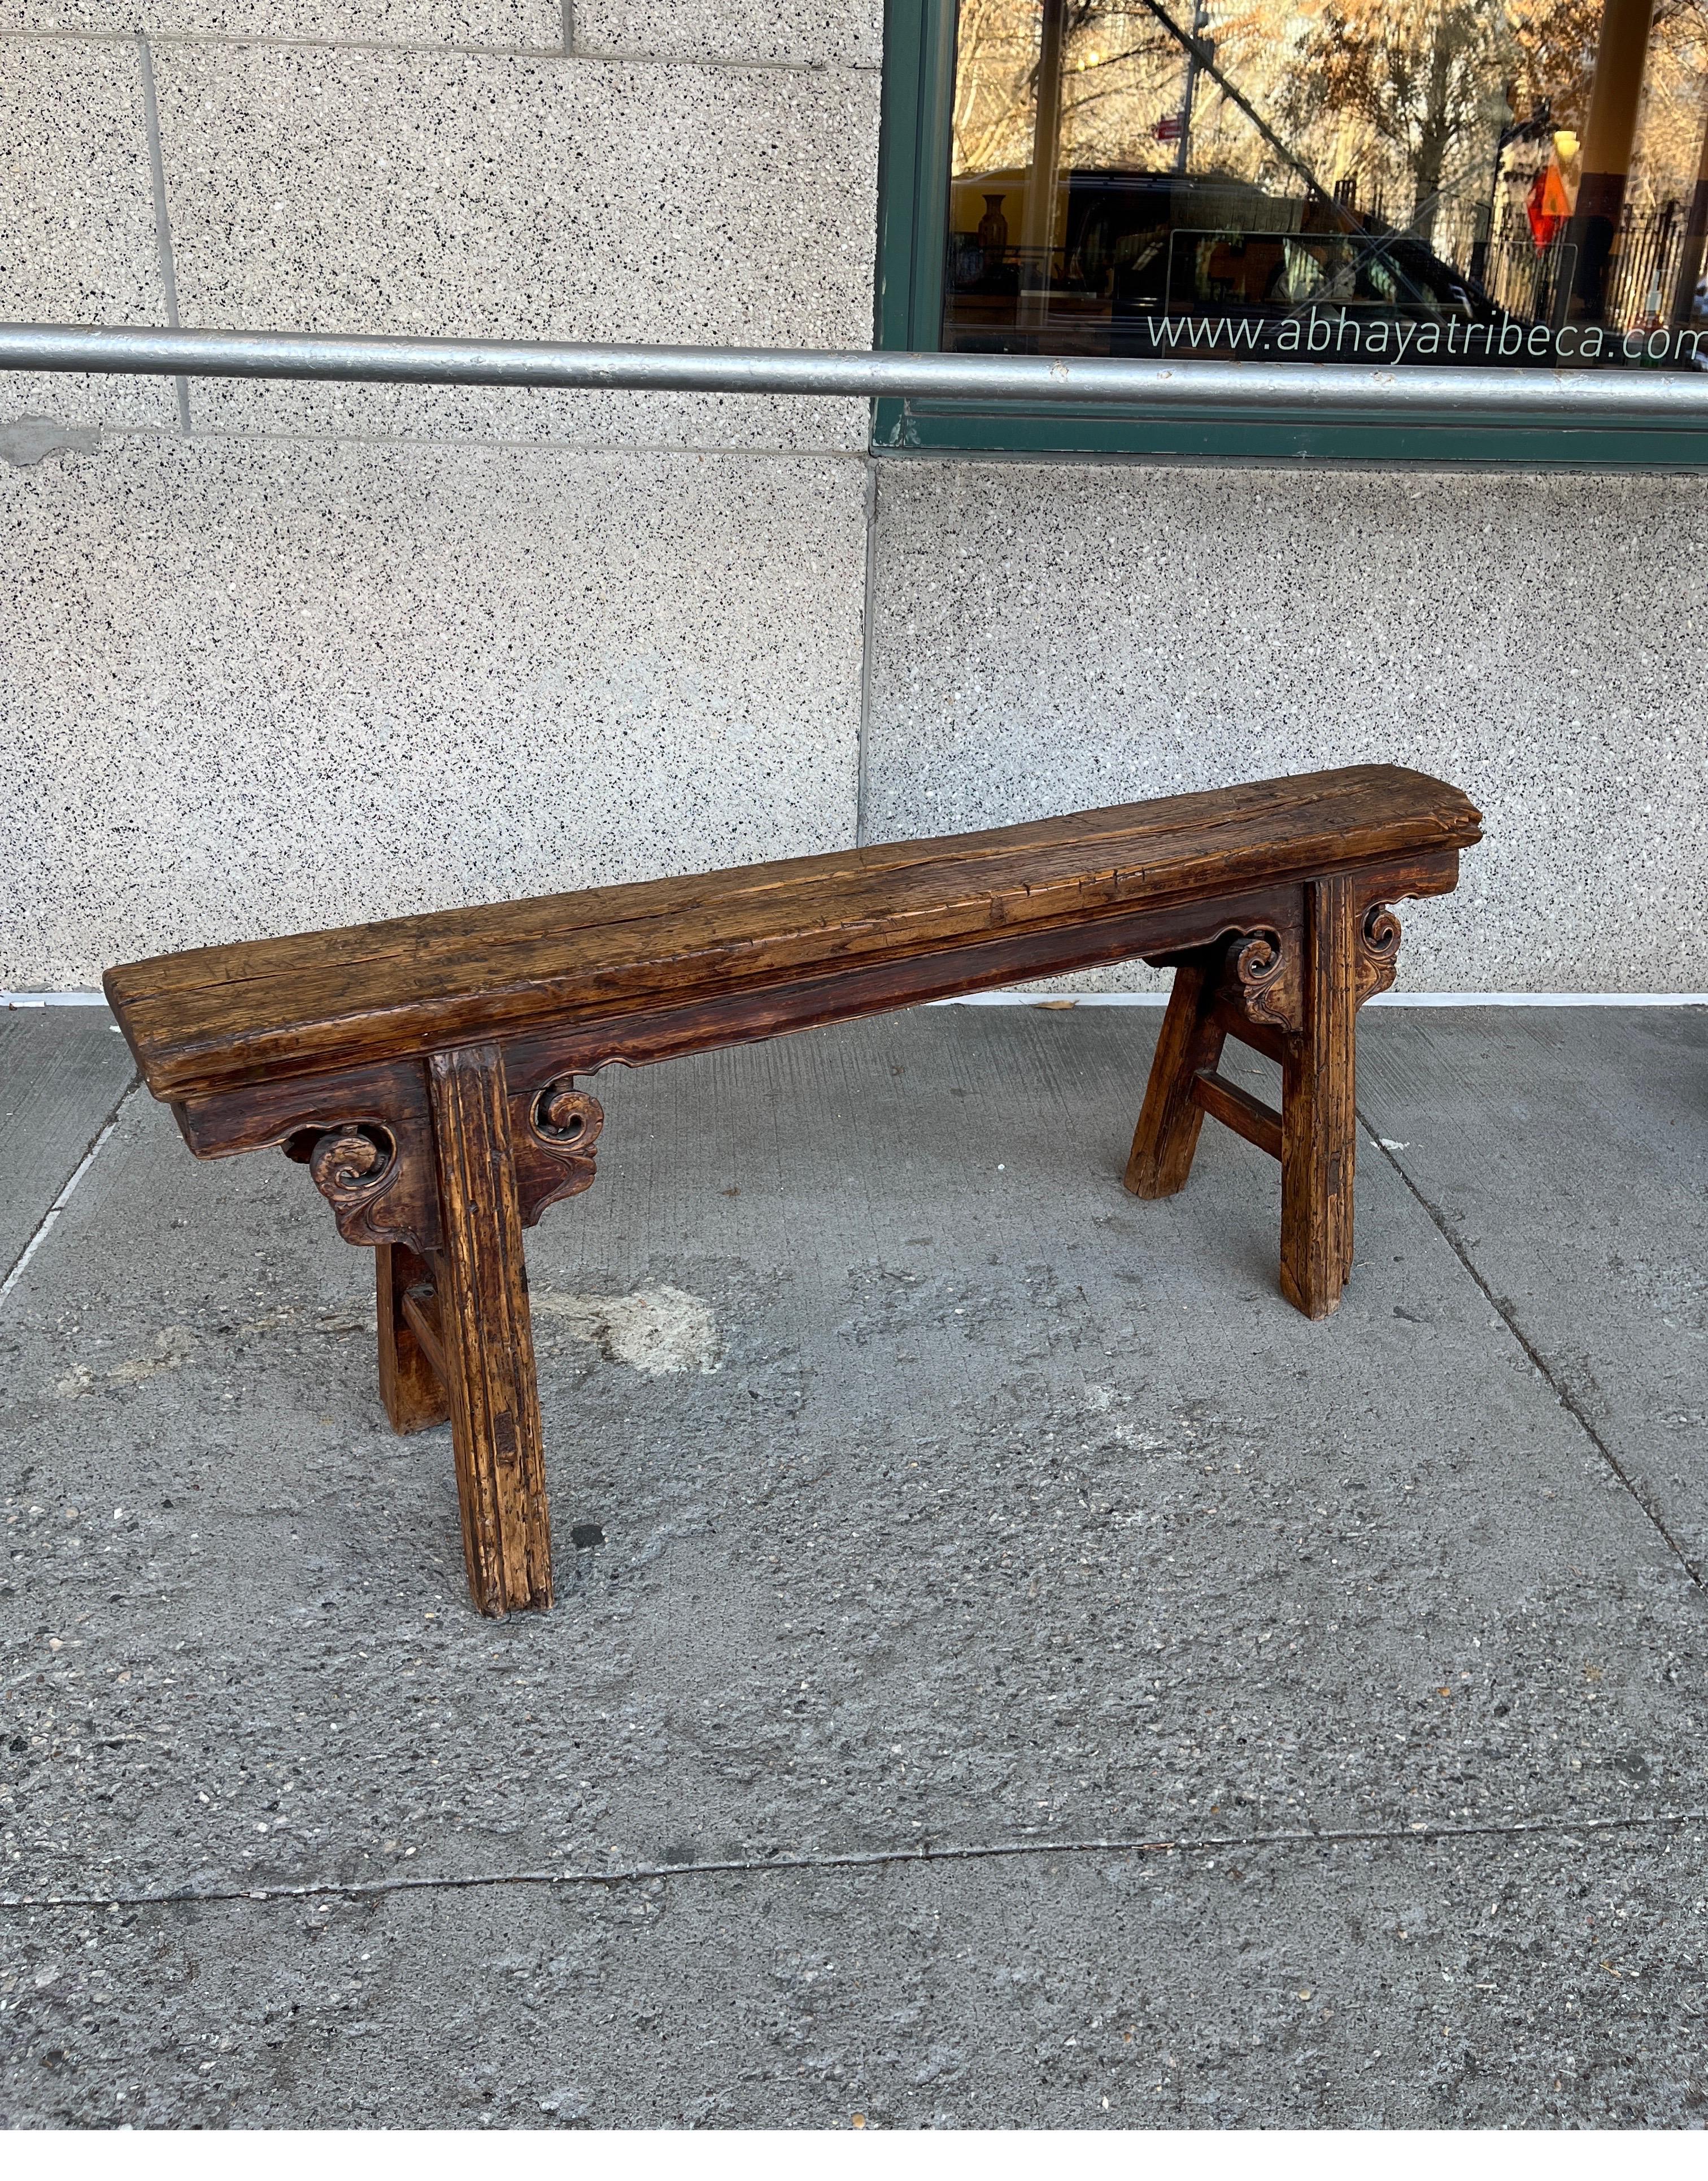 A truly Classic antique Chinese two person bench with great patina and simple design. Highlighted by two simple expertly carved decorations, this entirely handmade elm bench exhibits its 150 years of use during the Qing Dynasty, the Republic Period